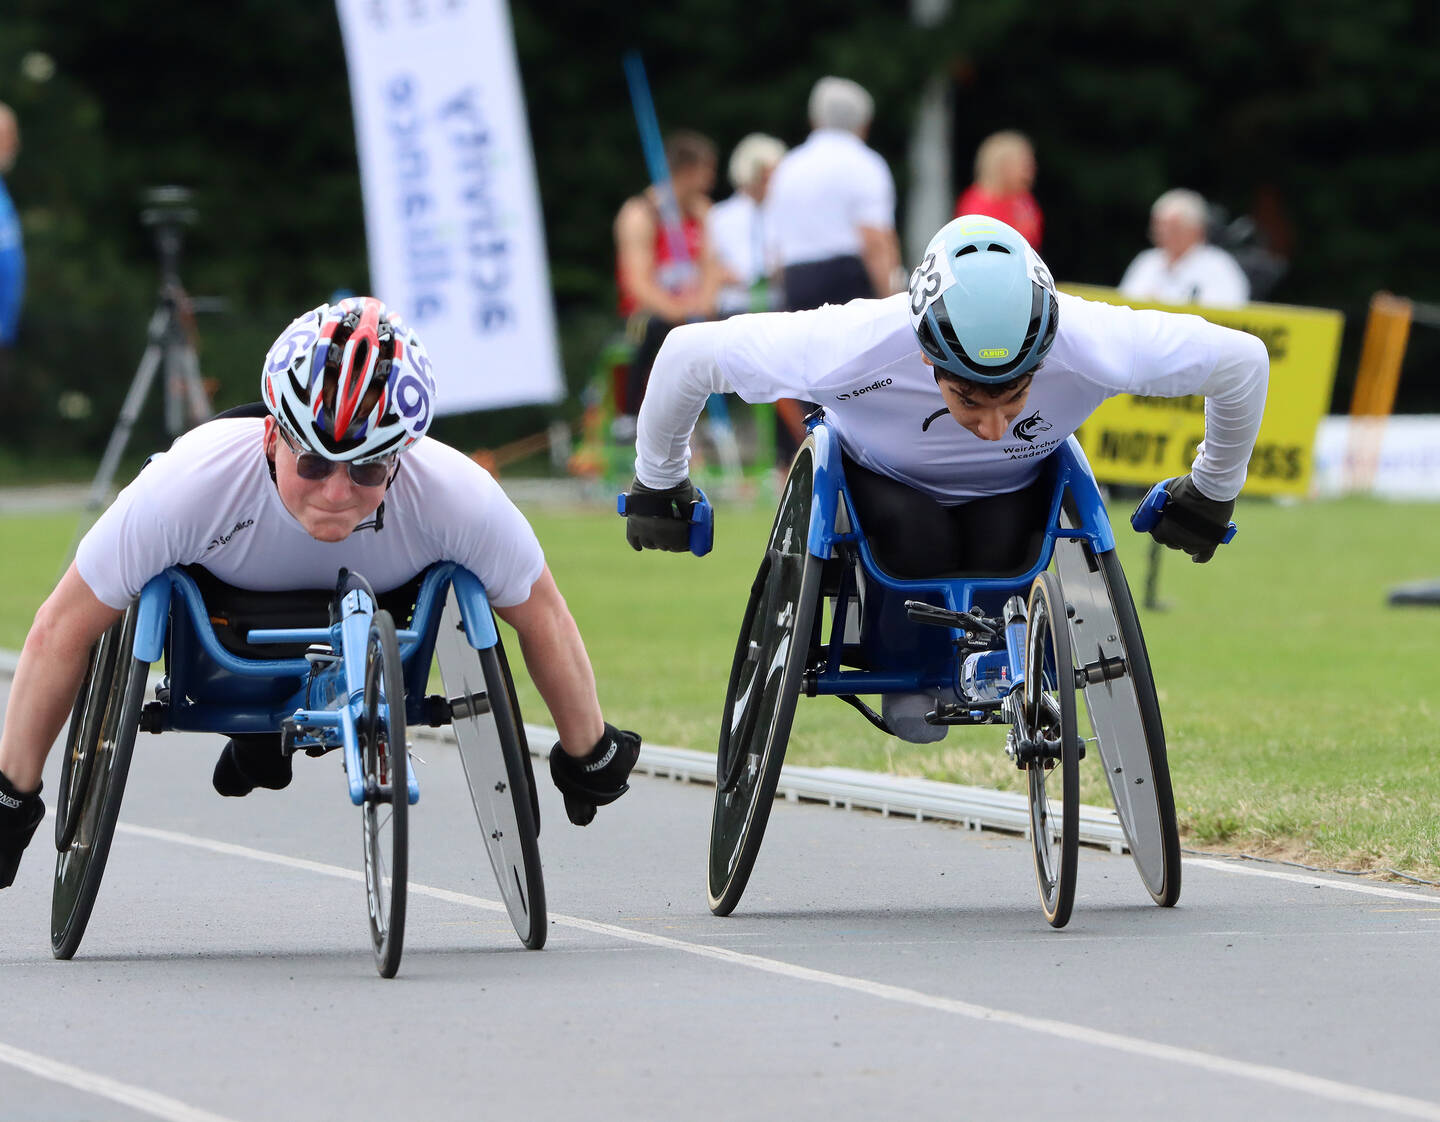 Two wheelchair athletes racing in an event at the Junior Athletics Championships